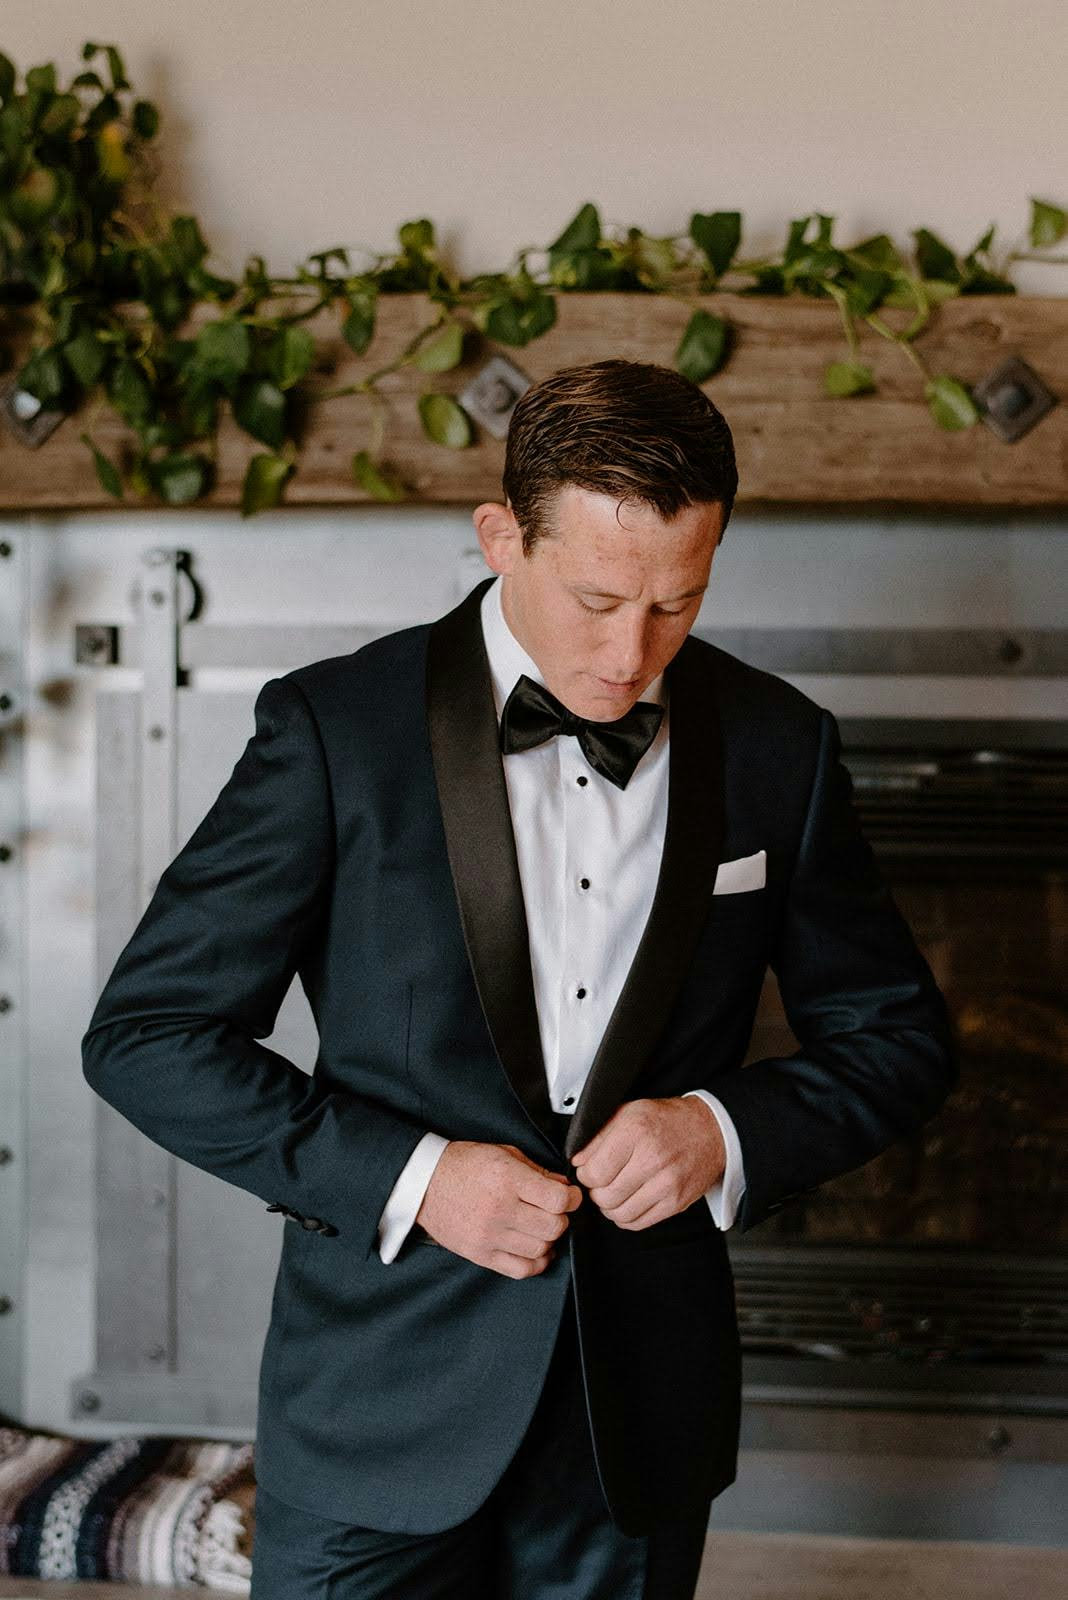 wedding planning checklist when to buy your wedding suit or tuxedo